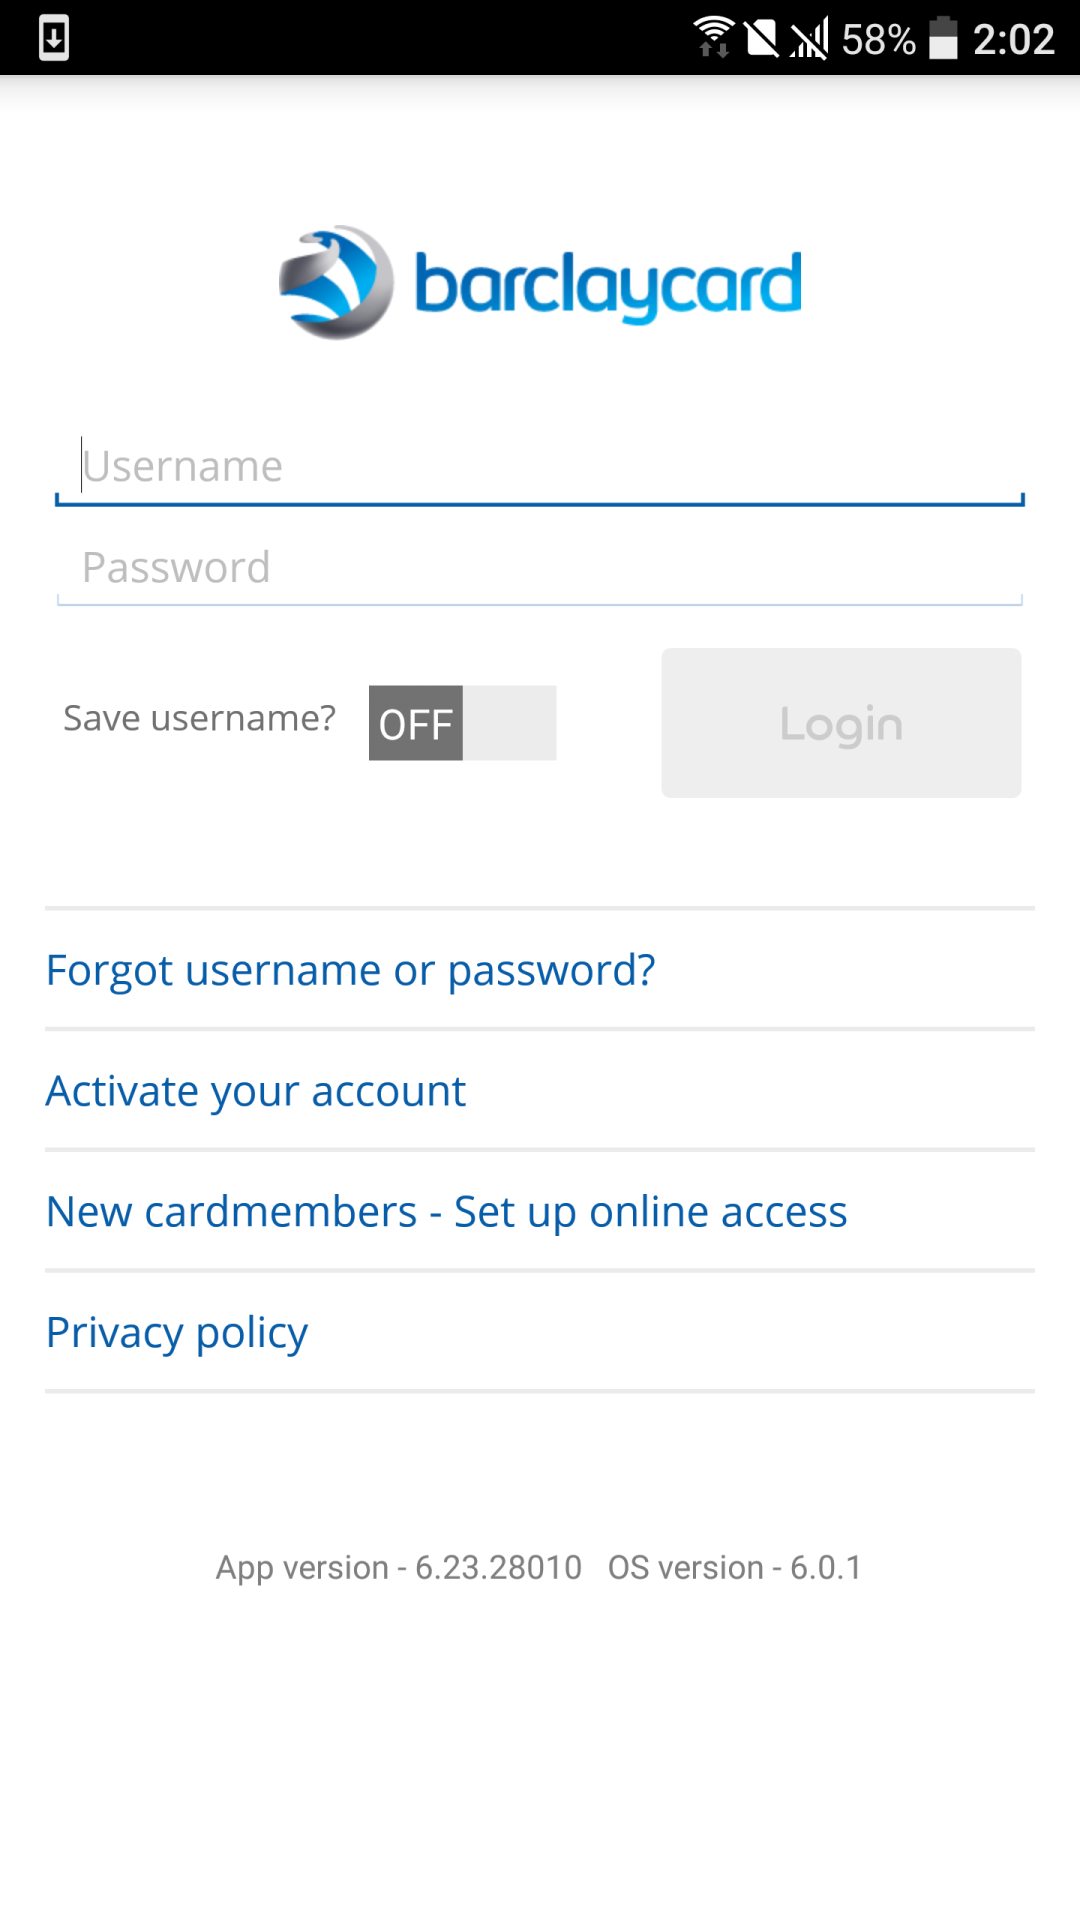 Barclaycard for Android screenshot #1